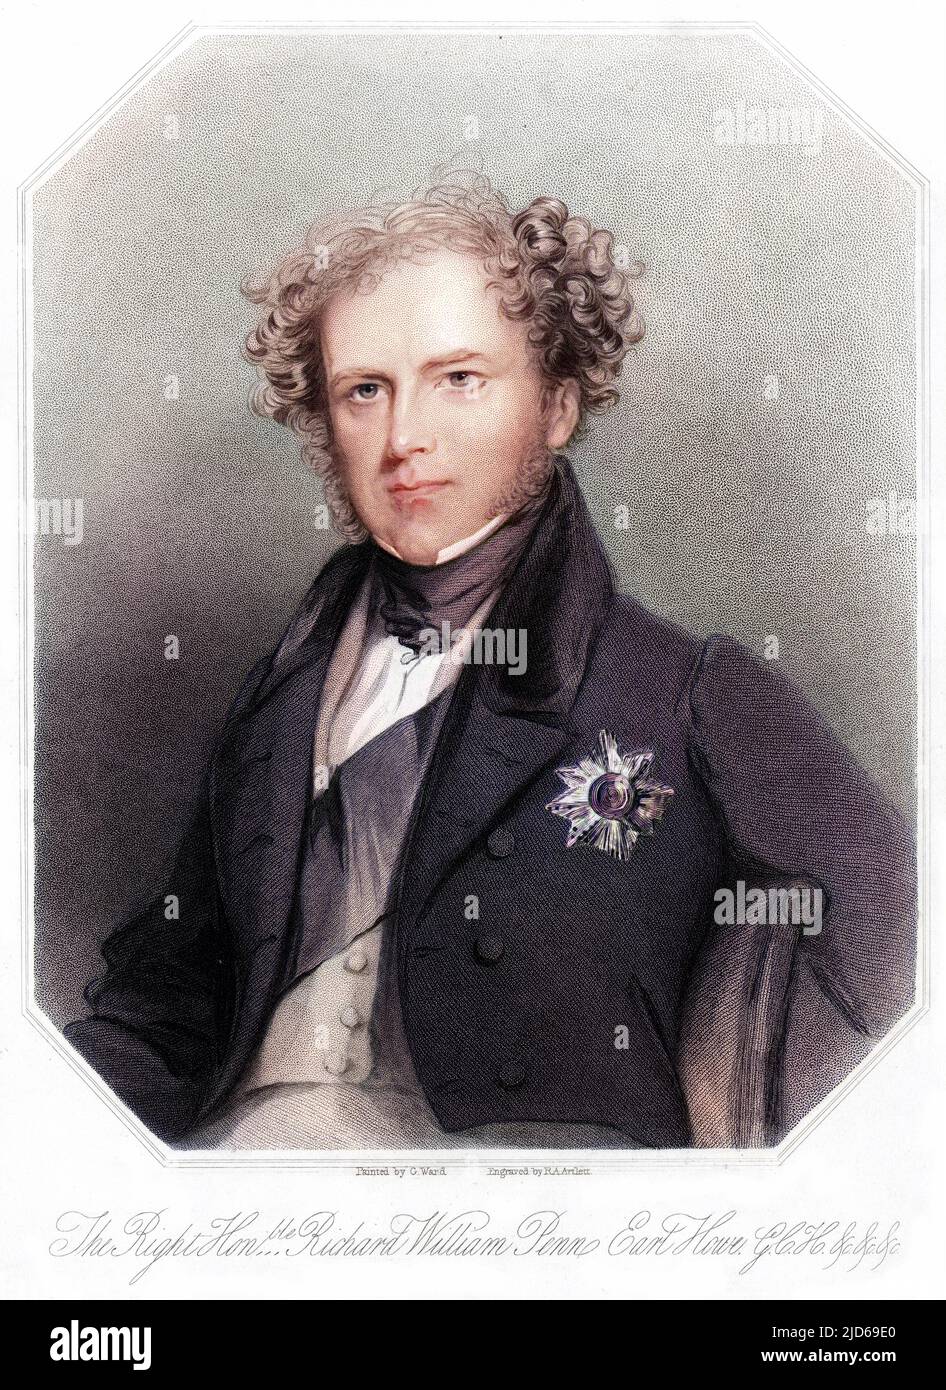 RICHARD WILLIAM PENN CURZON- HOWE, first earl HOWE of the second creation statesman Colourised version of : 10161348       Date: 1796 - 1870 Stock Photo